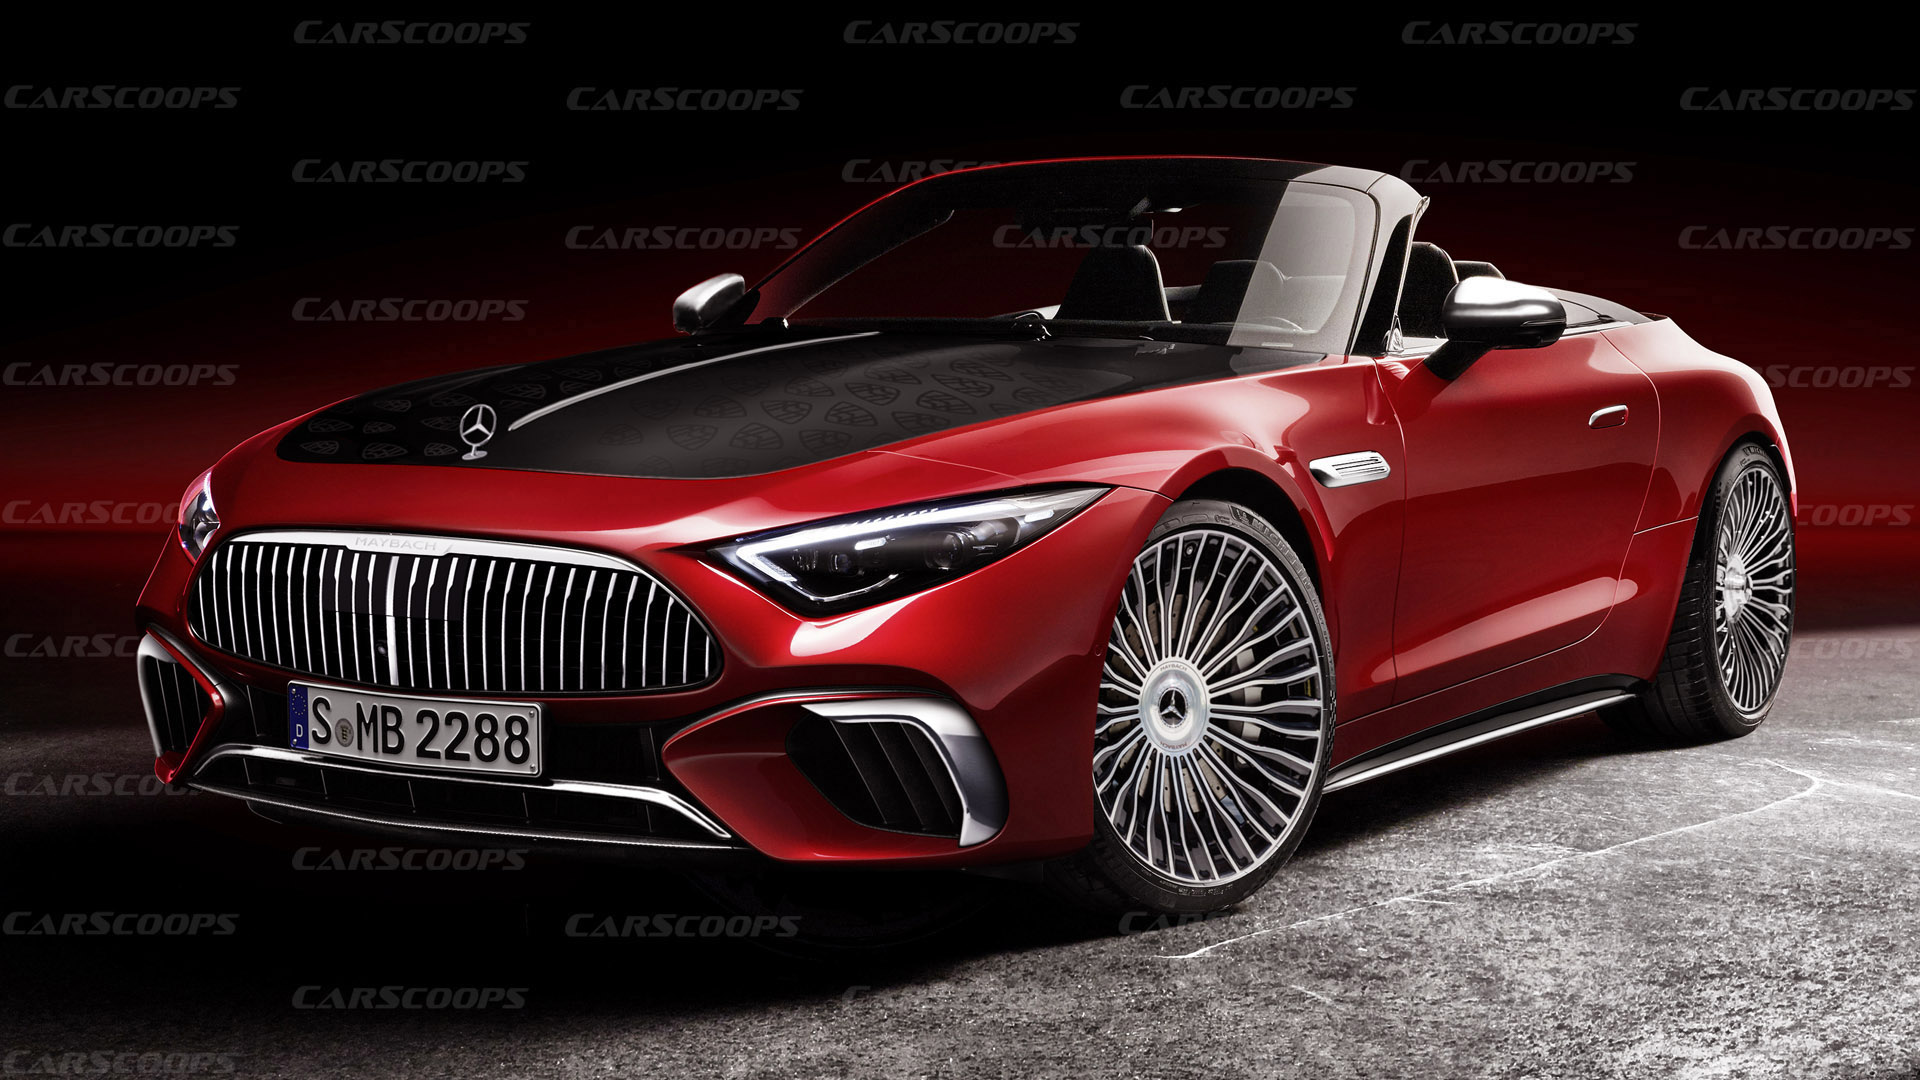 https://www.carscoops.com/wp-content/uploads/2022/05/Mercedes-Maybach-SL-Rendering-Carscoops-front.jpg